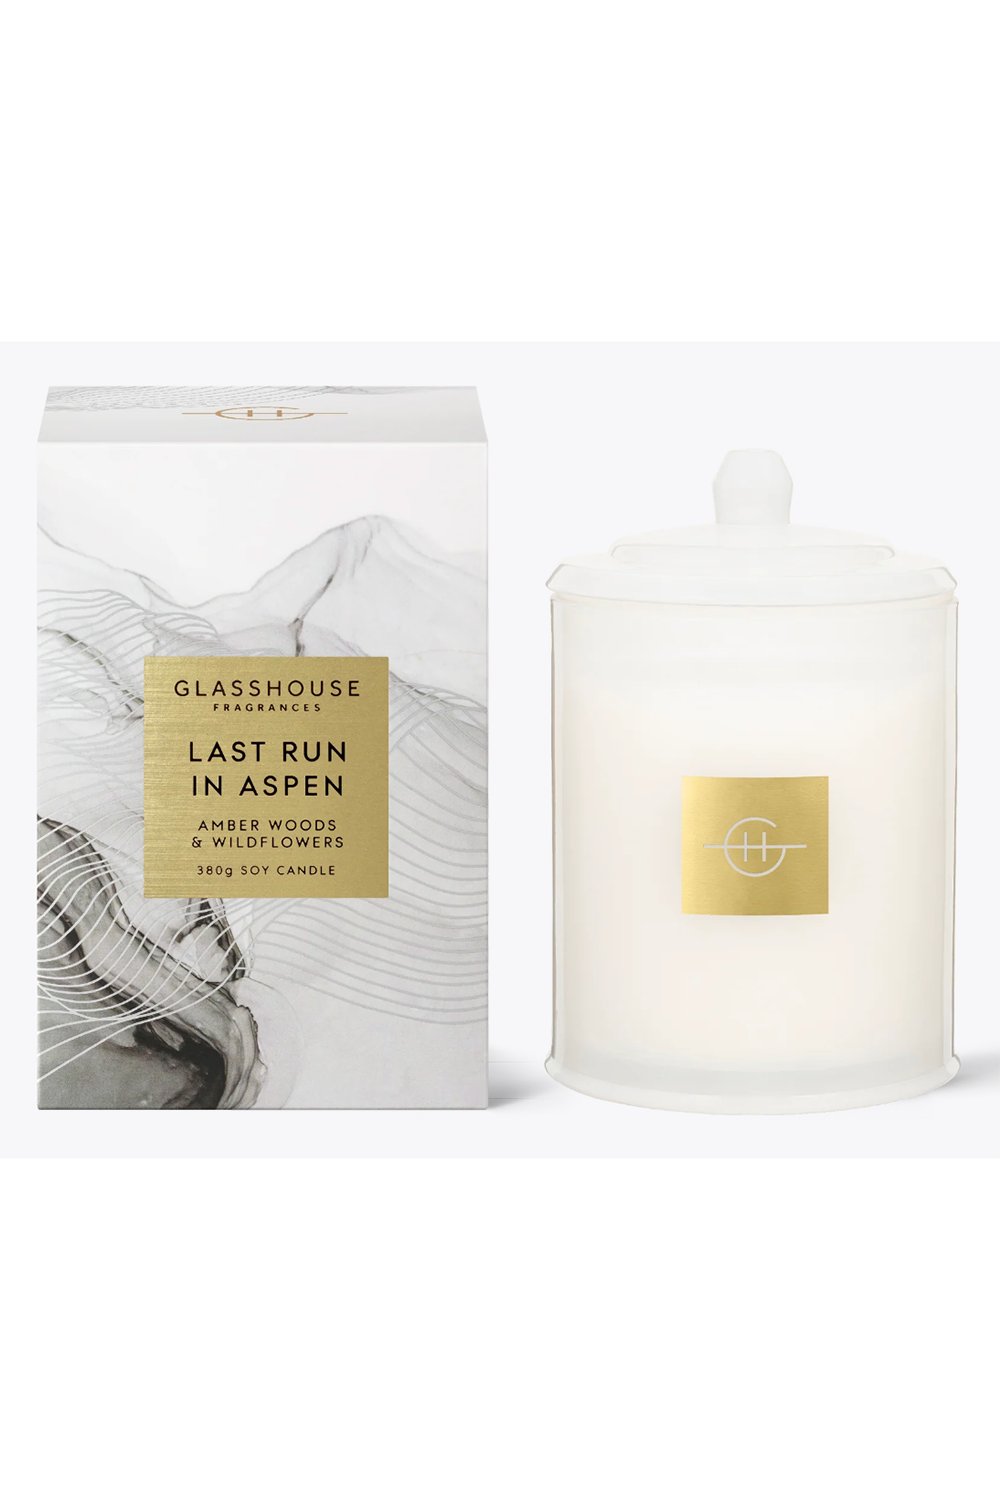 Glasshouse *HOLIDAY* Fragrance Candle - Last Run in Aspen